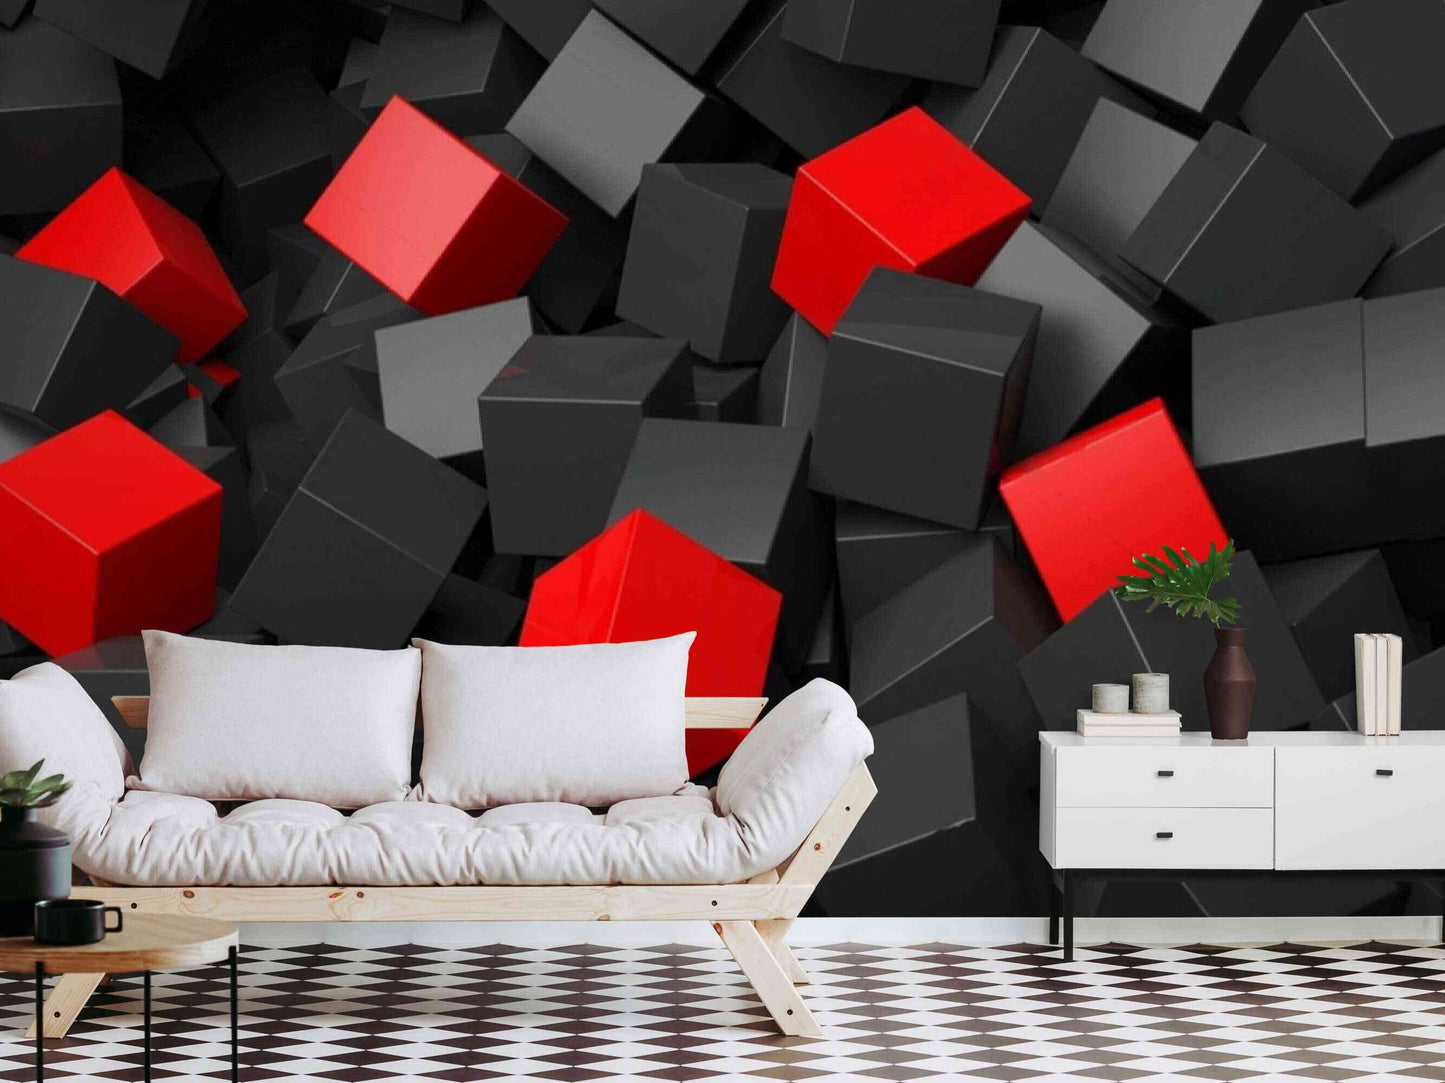 Eye-catching black and red geometric wallpaper adding vibrancy to a room